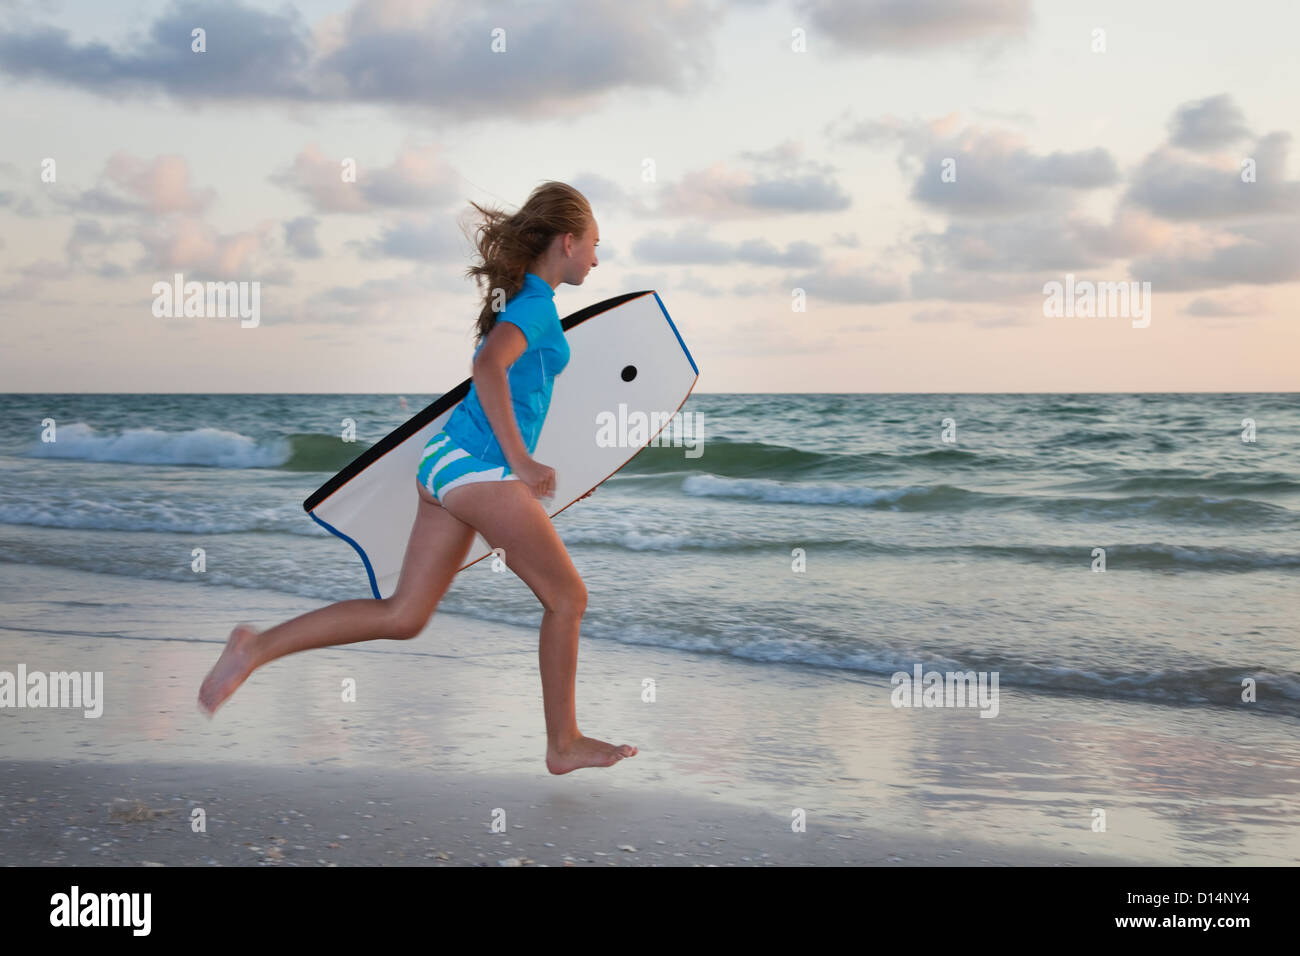 USA, Florida, St. Petersburg, girl (12-13) holding boogie board and looking at view Stock Photo